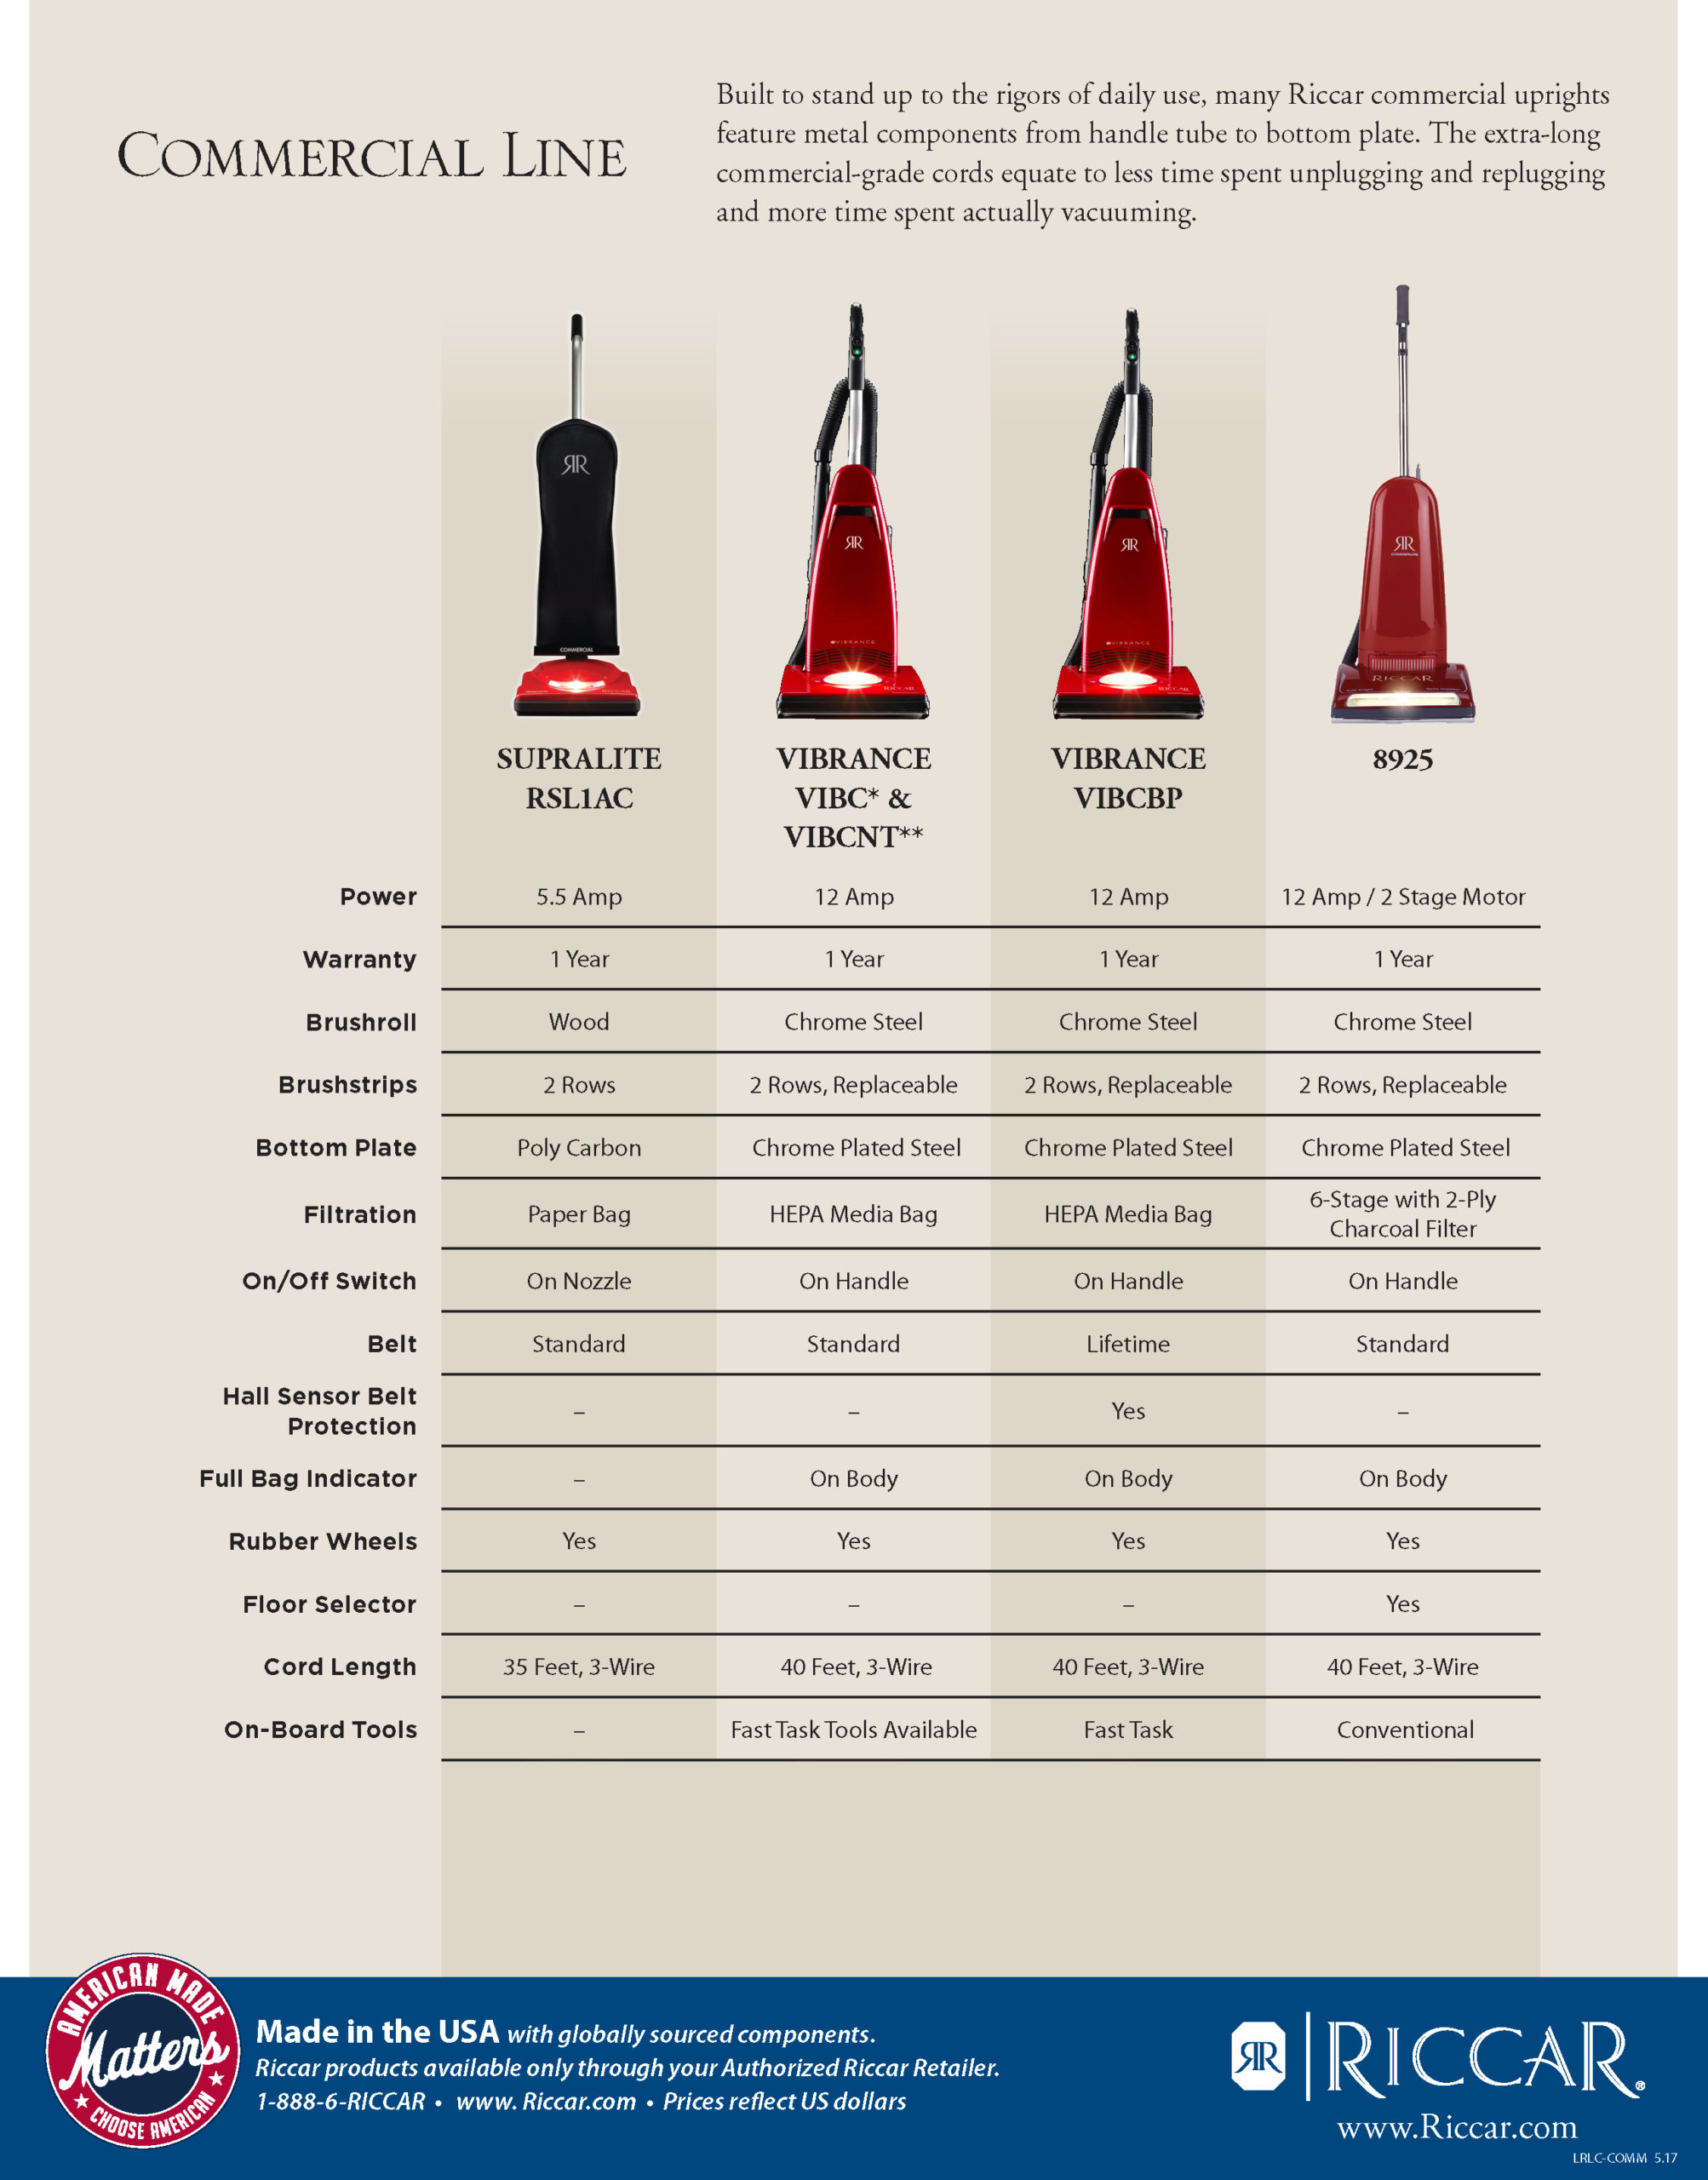 Riccar Vacuums & Central Vacuums, Indianapolis, IN | Vacuums & More